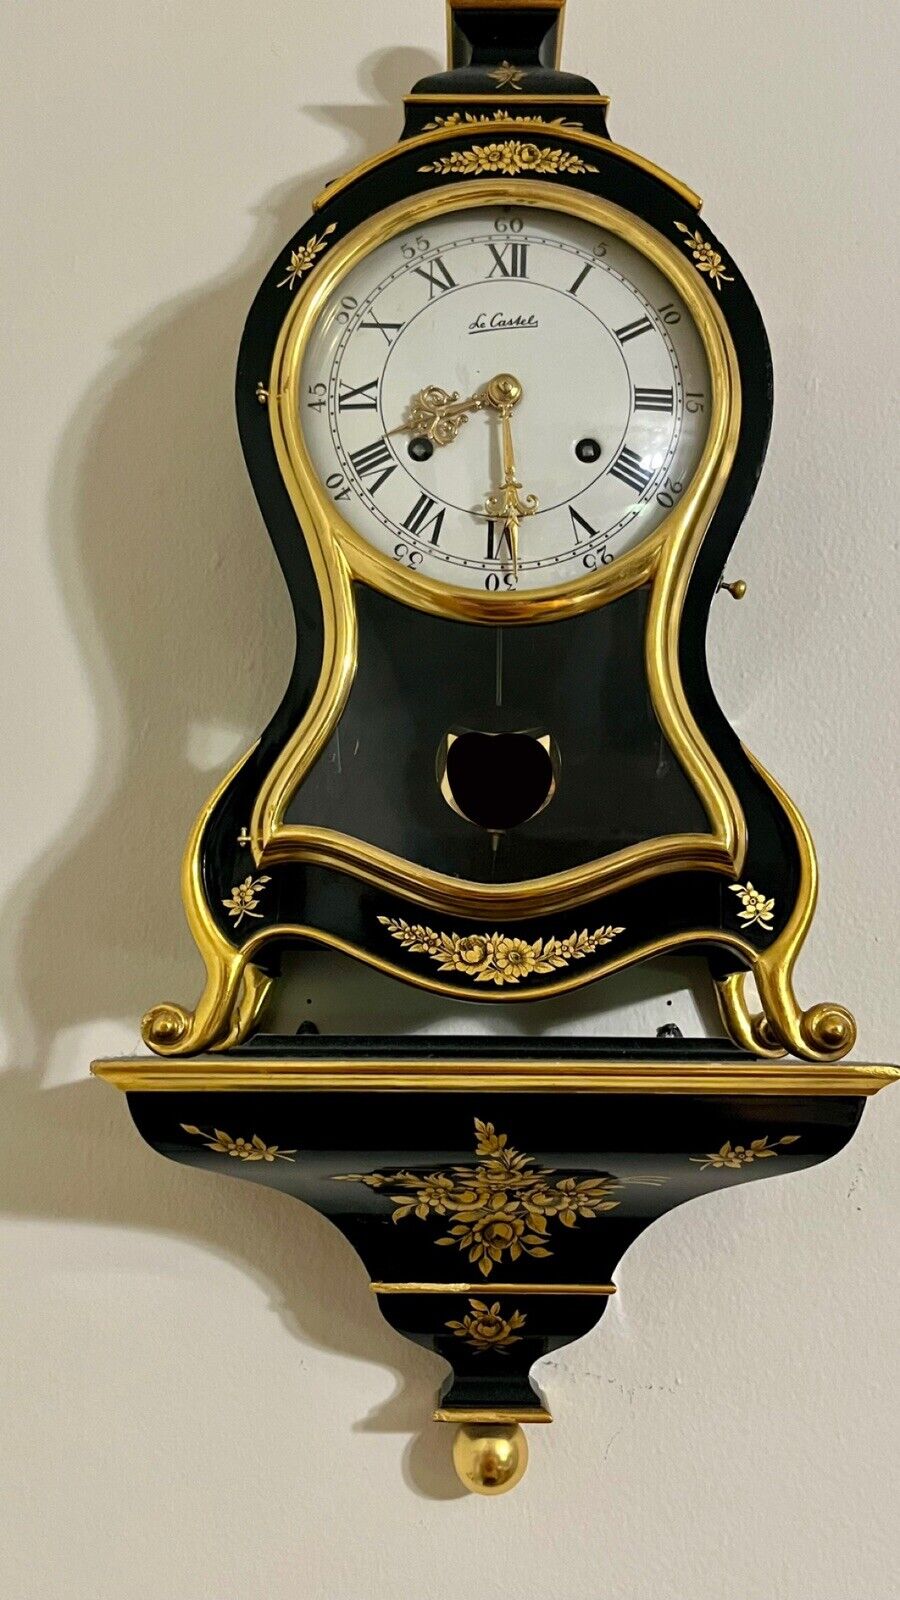 Antique wooden wall clock with pendulum Le Castel Works